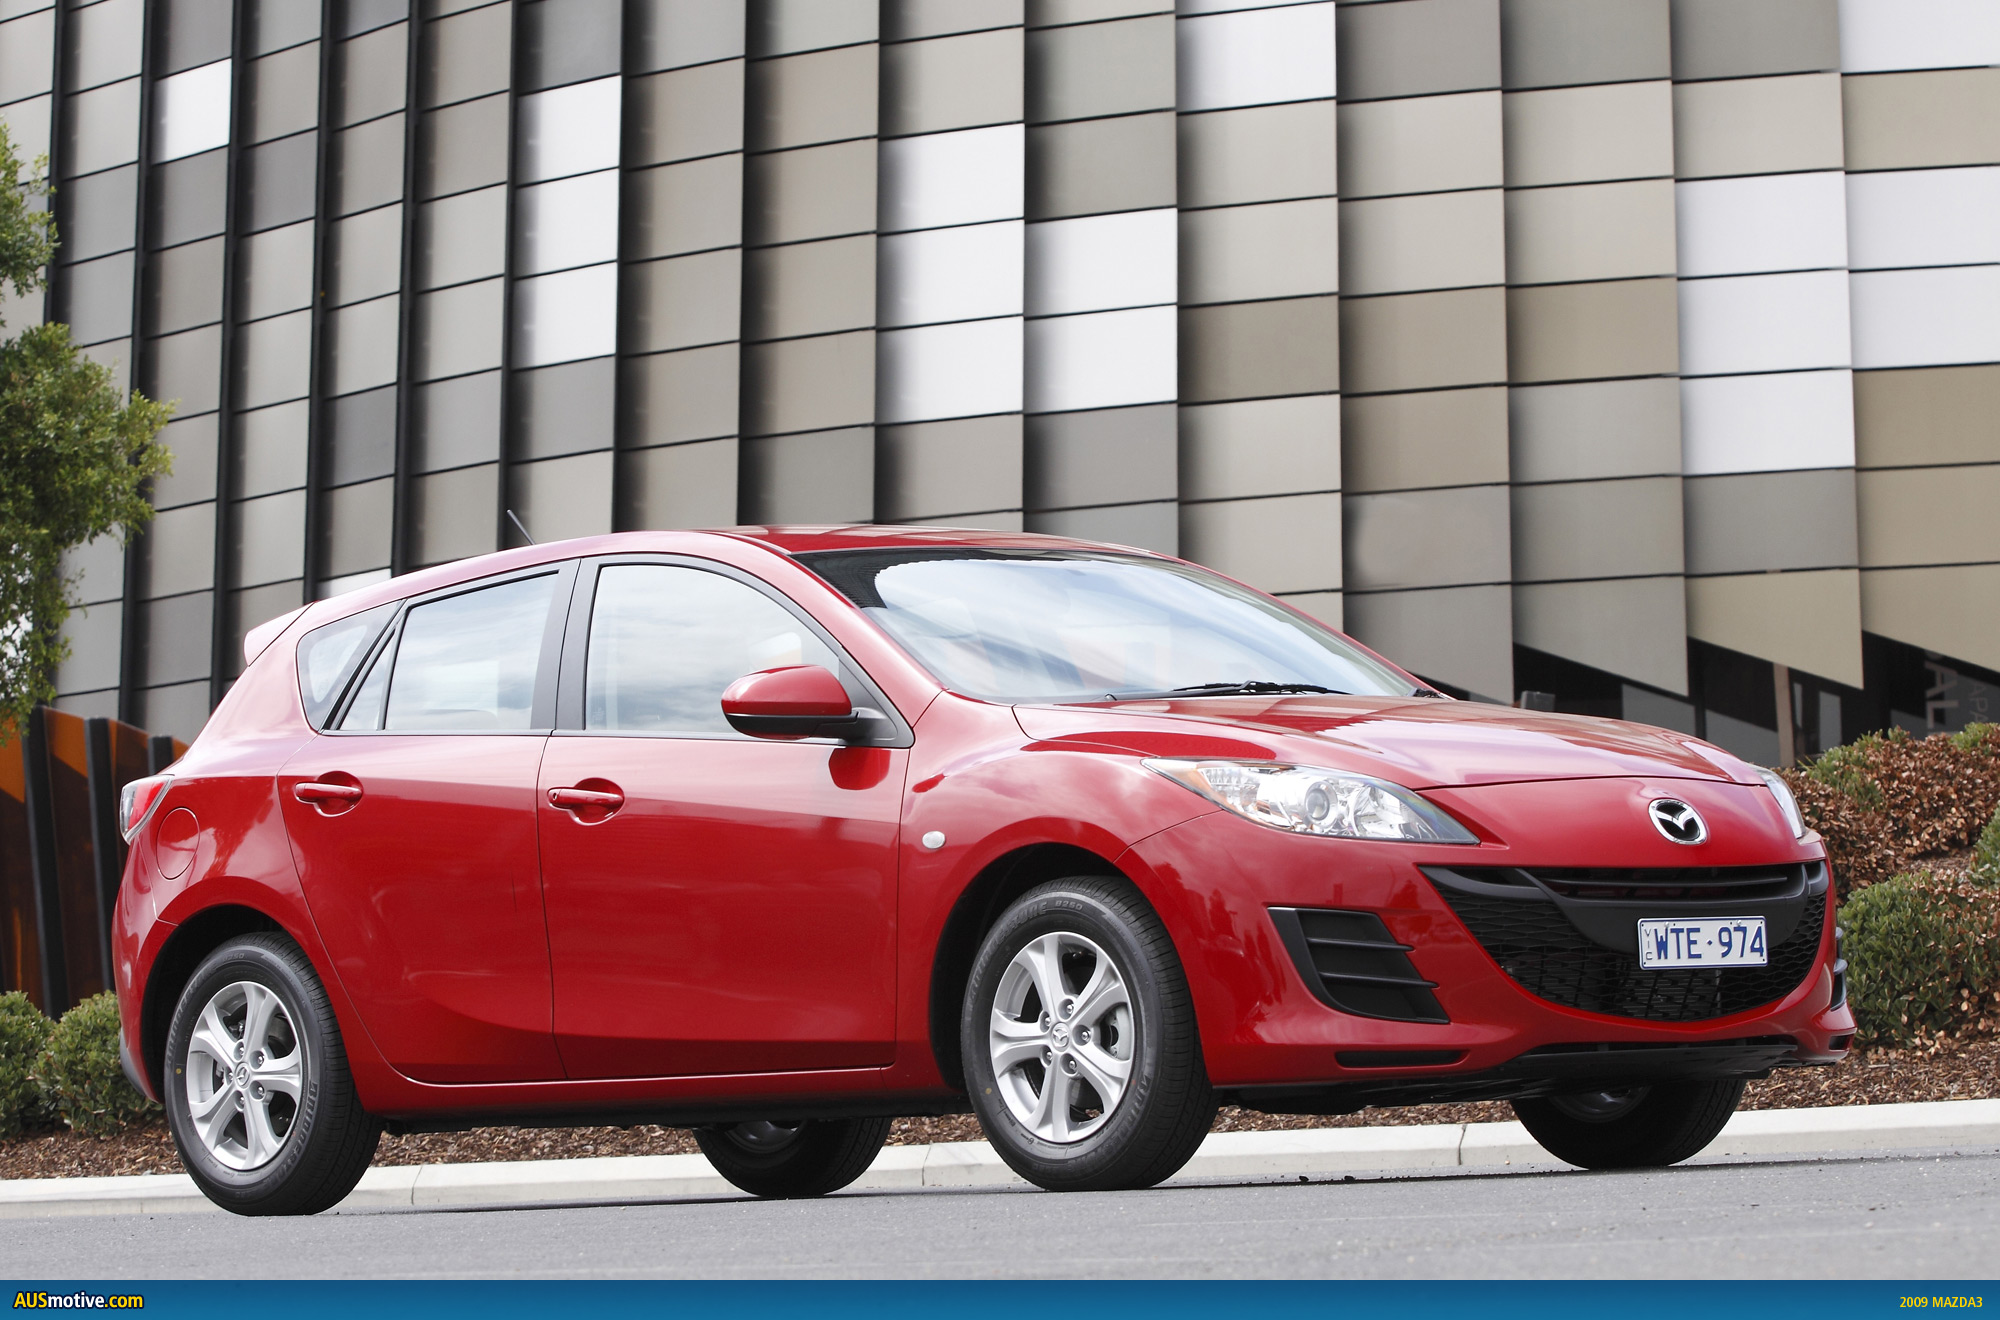 Mazda 3 16. View Download Wallpaper. 2000x1320. Comments